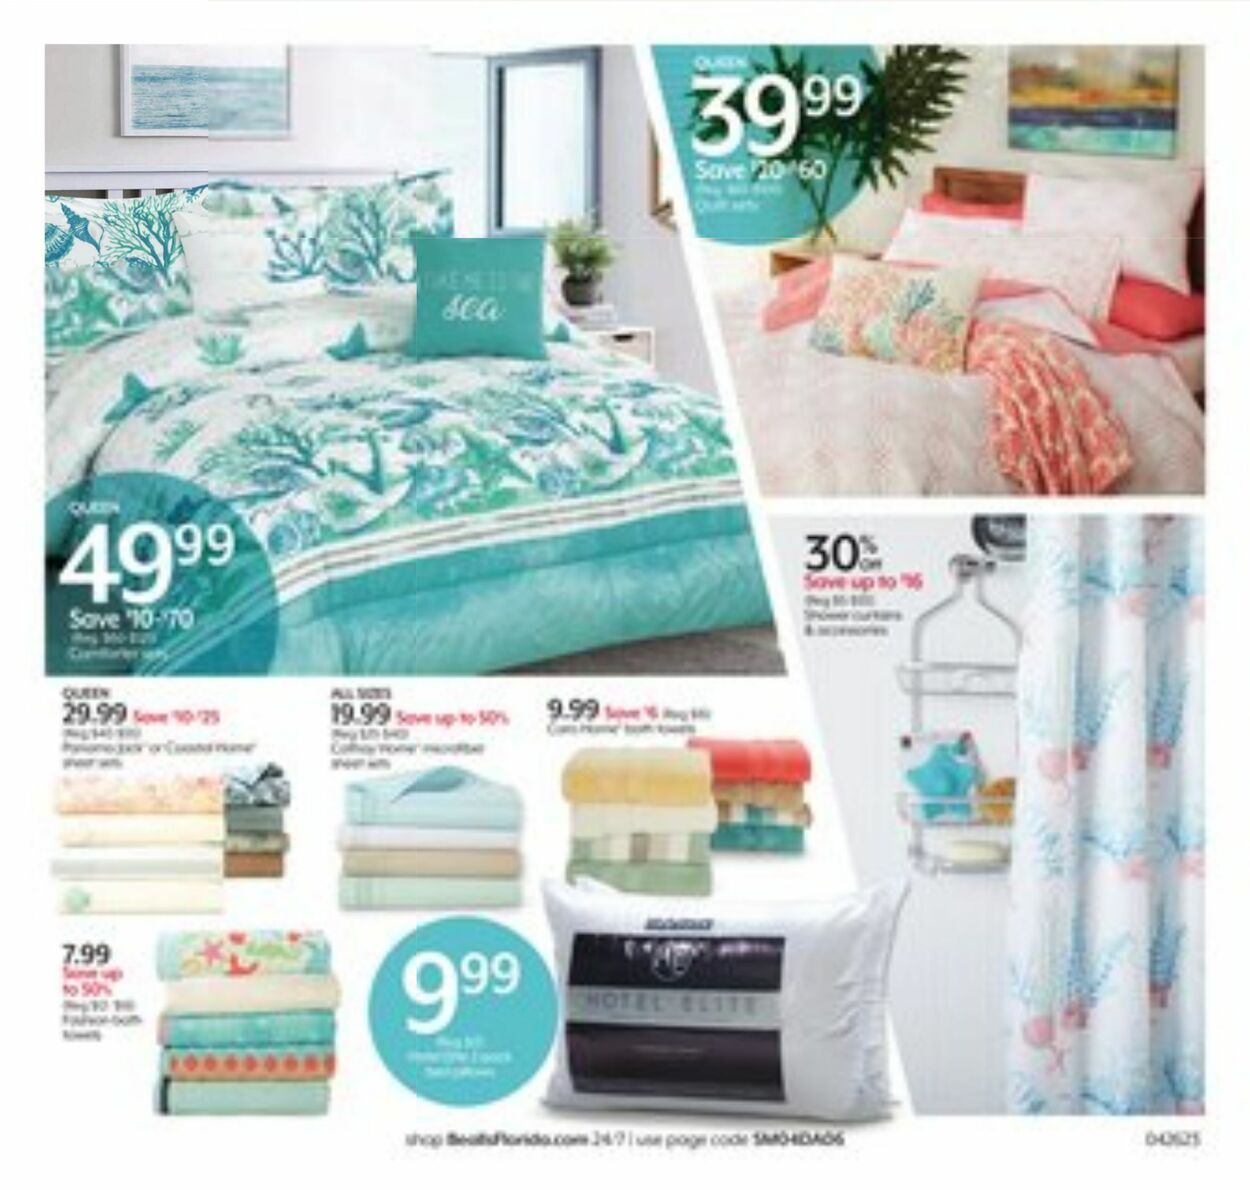 Bealls Florida Ad from 04/26/2023